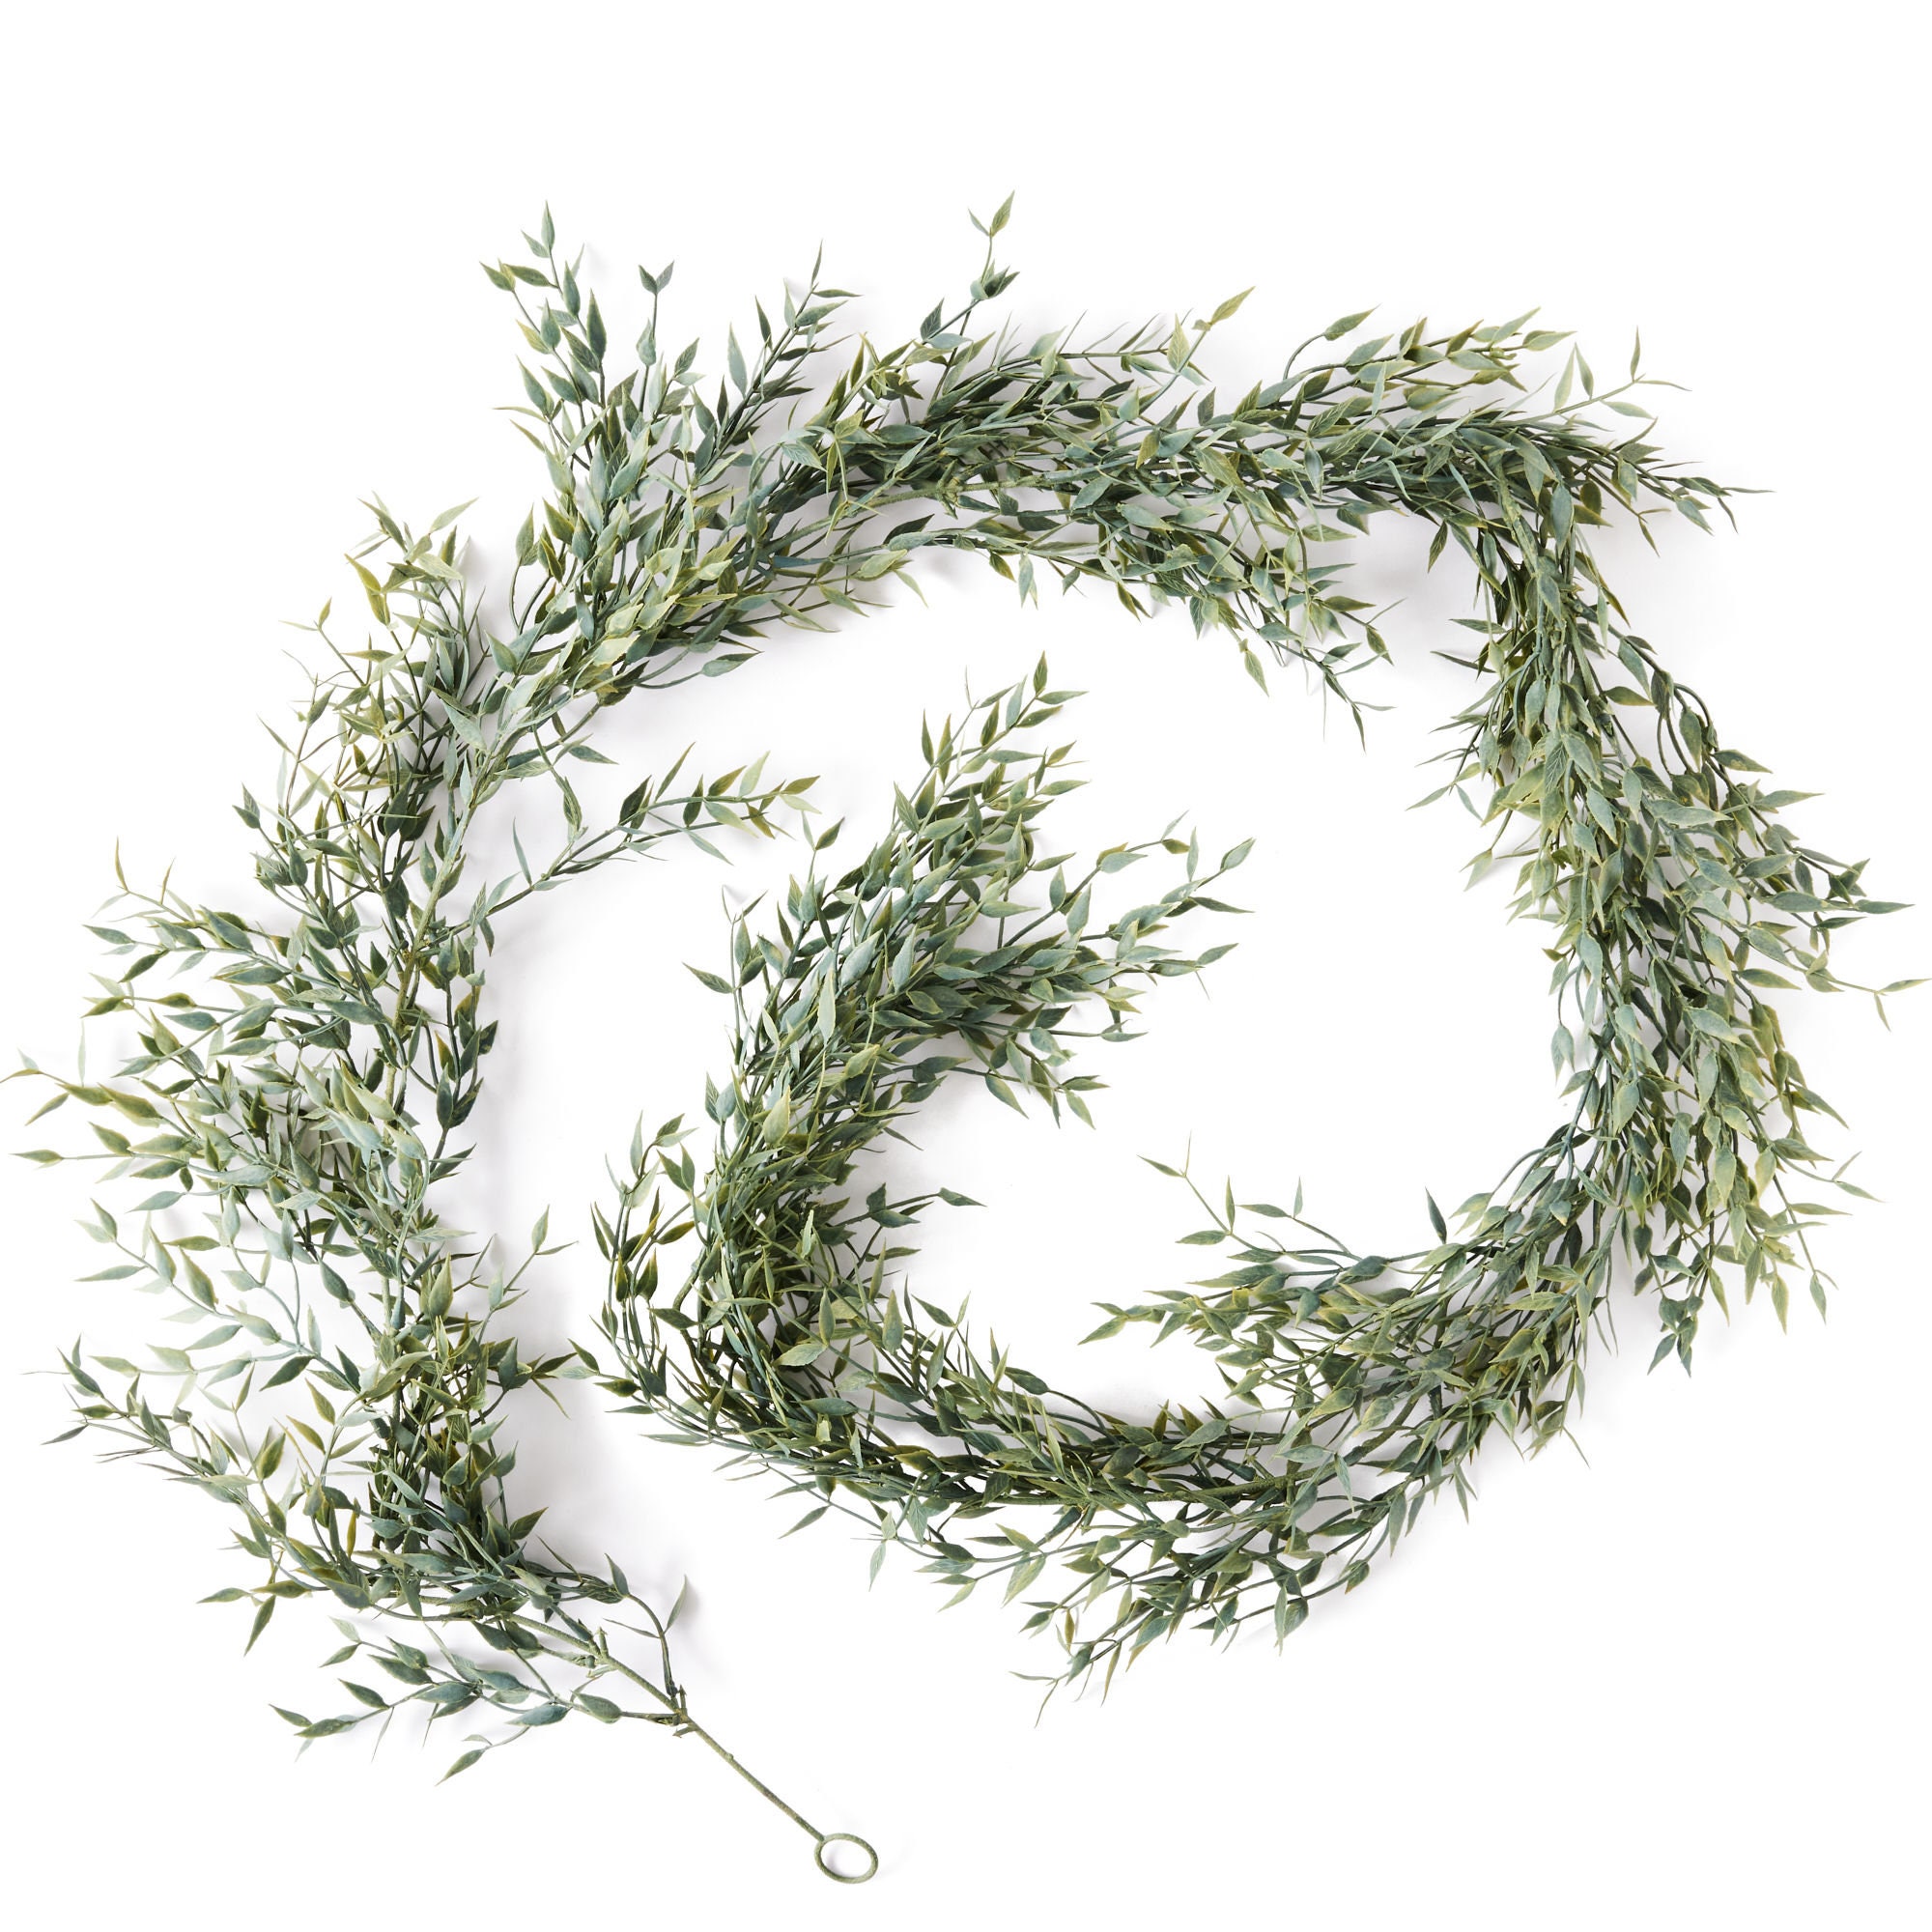  Olive Garland Greenery Garlands Décor - 6FT 96 LED Lighted  Artificial Garland Faux Vines Flower Wreaths Lights for Wedding Christmas  Garland DiliComing : Home & Kitchen